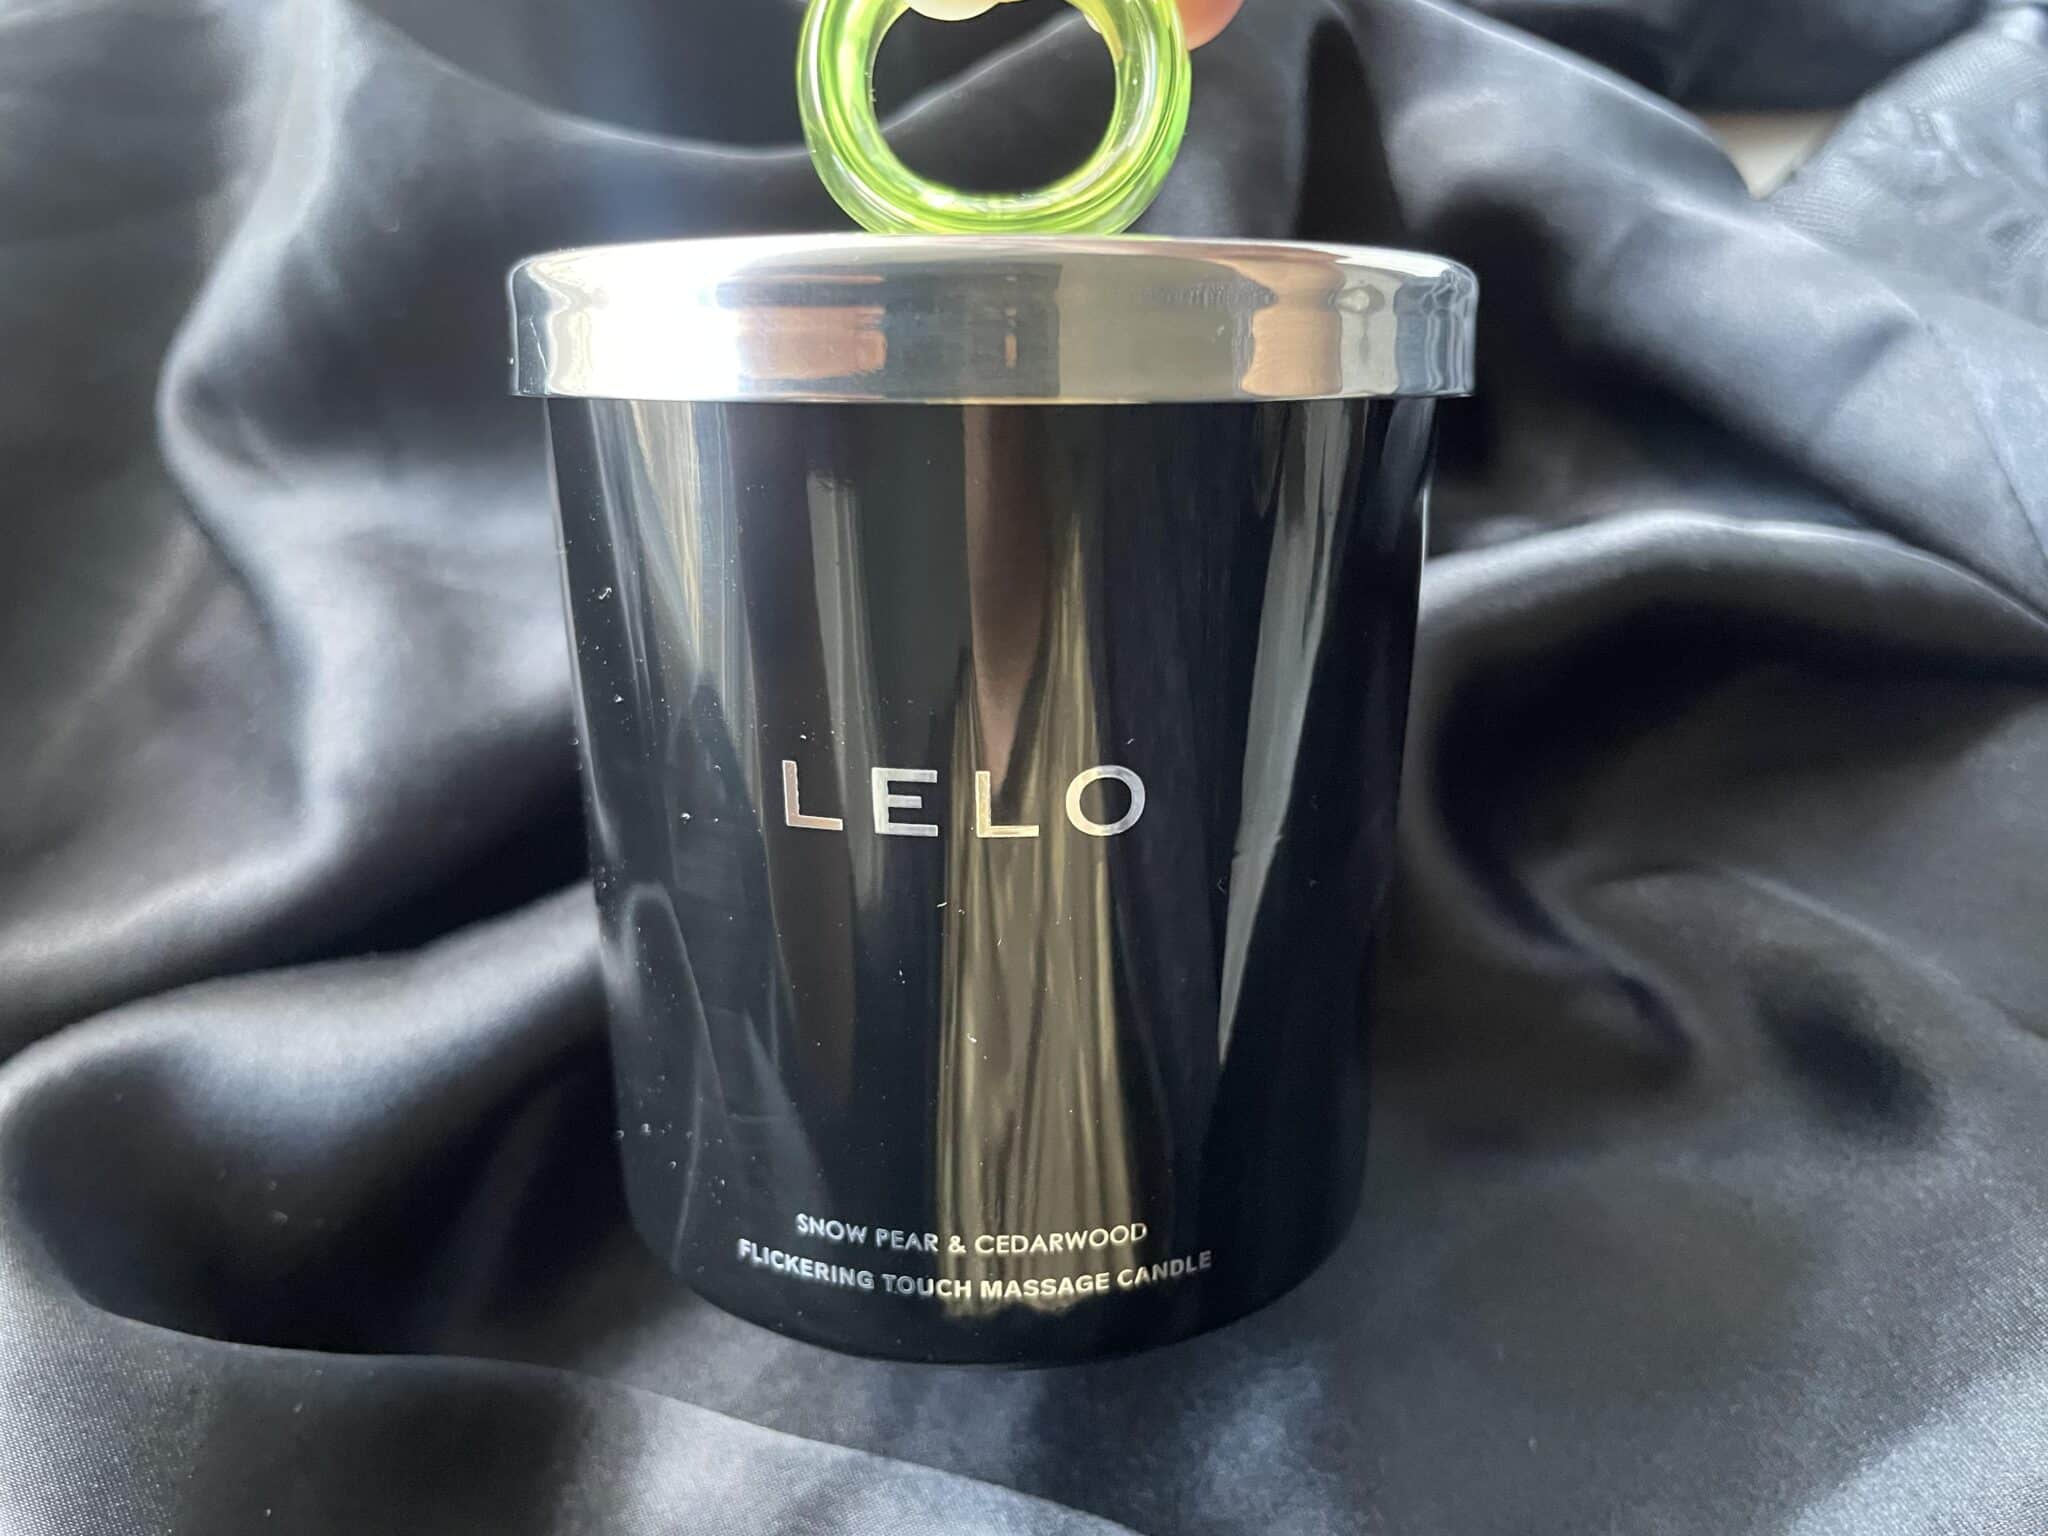 LELO Flickering Touch Massage Candle A Review of the LELO Flickering Touch Massage Candle’s Quality